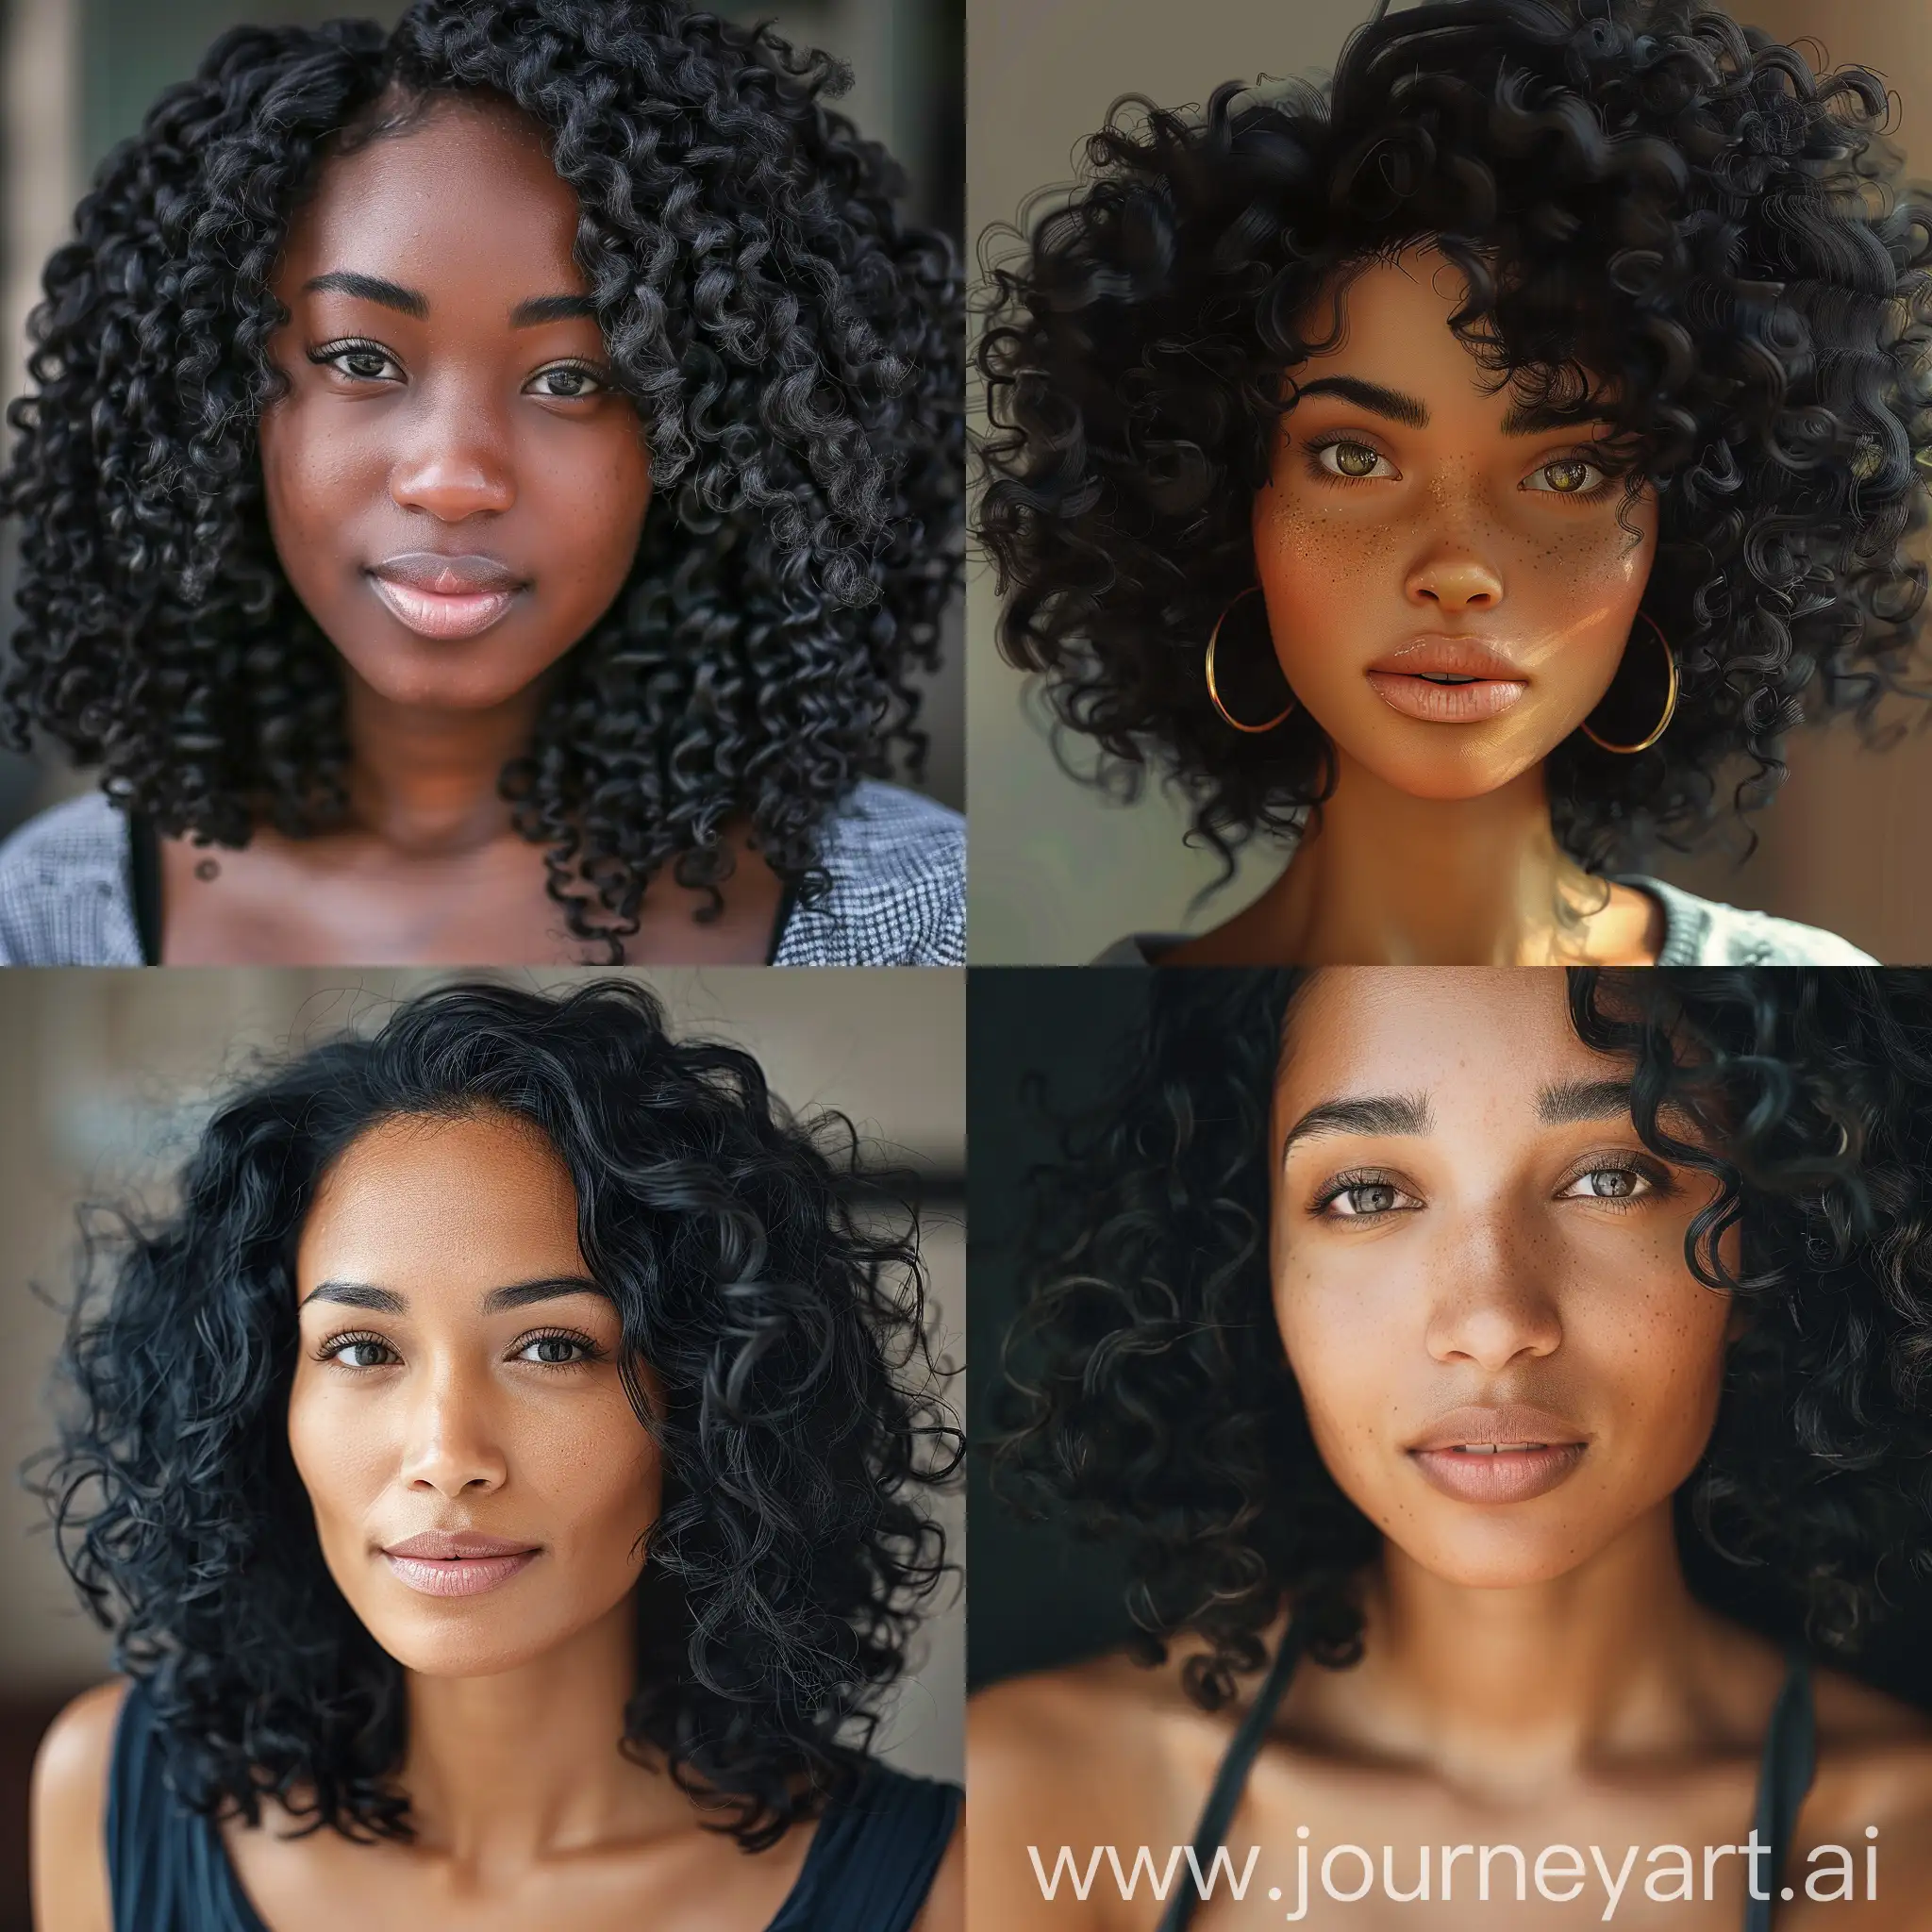 Portrait-of-a-Black-Woman-with-Curly-Hair-Age-30